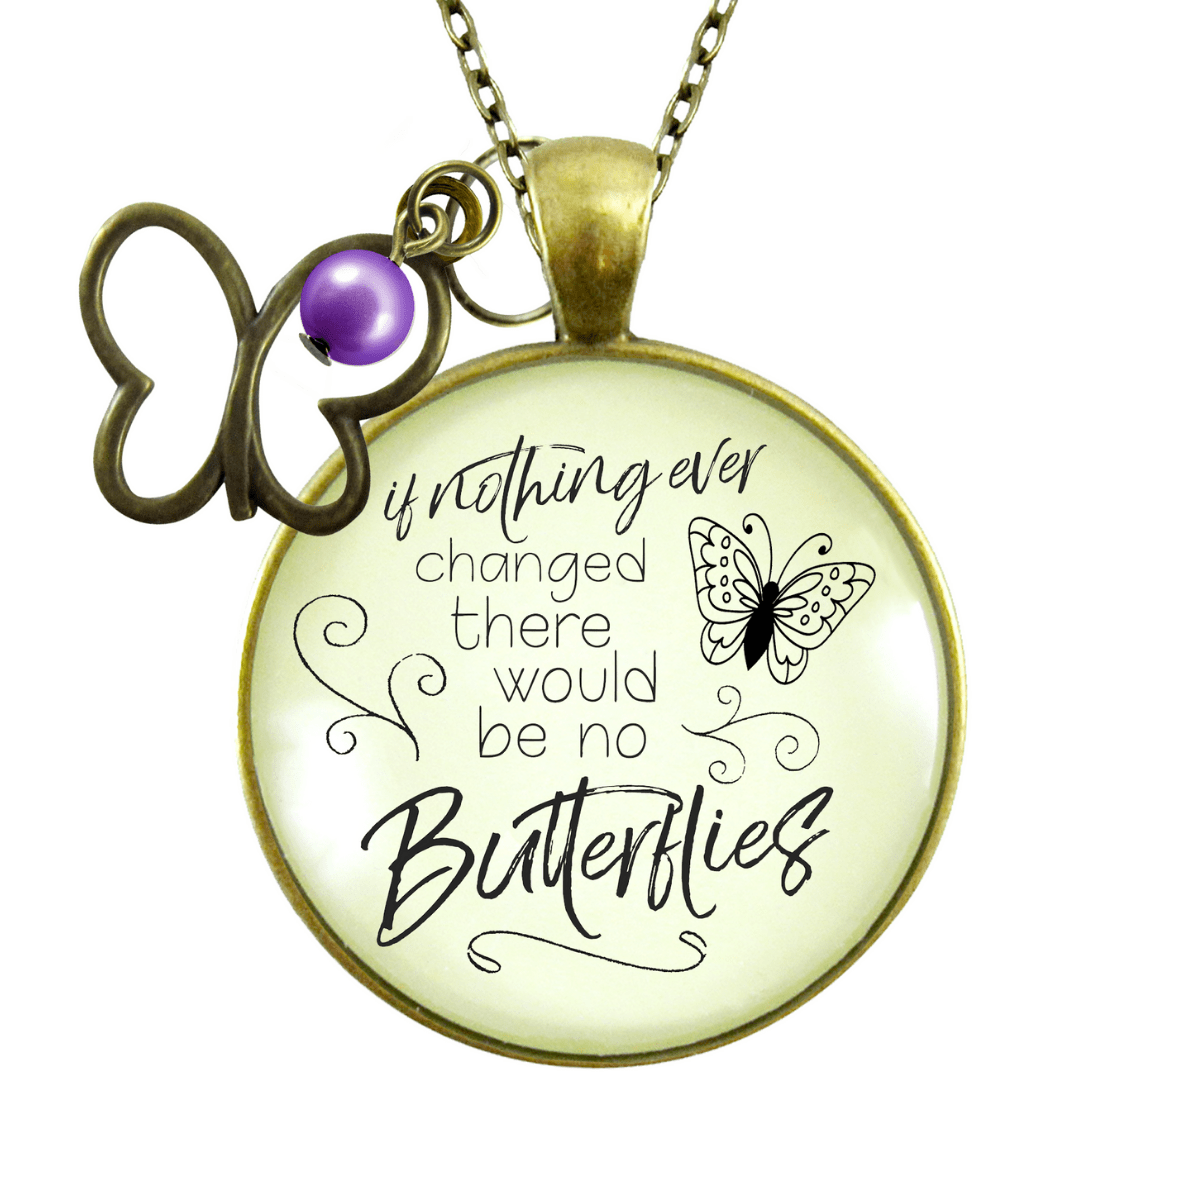 Gutsy Goodness Butterfly Necklace If Nothing Changed Inspire Word Butterfly Charm Purple Bead - Gutsy Goodness Handmade Jewelry;Butterfly Necklace If Nothing Changed Inspire Word Butterfly Charm Purple Bead - Gutsy Goodness Handmade Jewelry Gifts